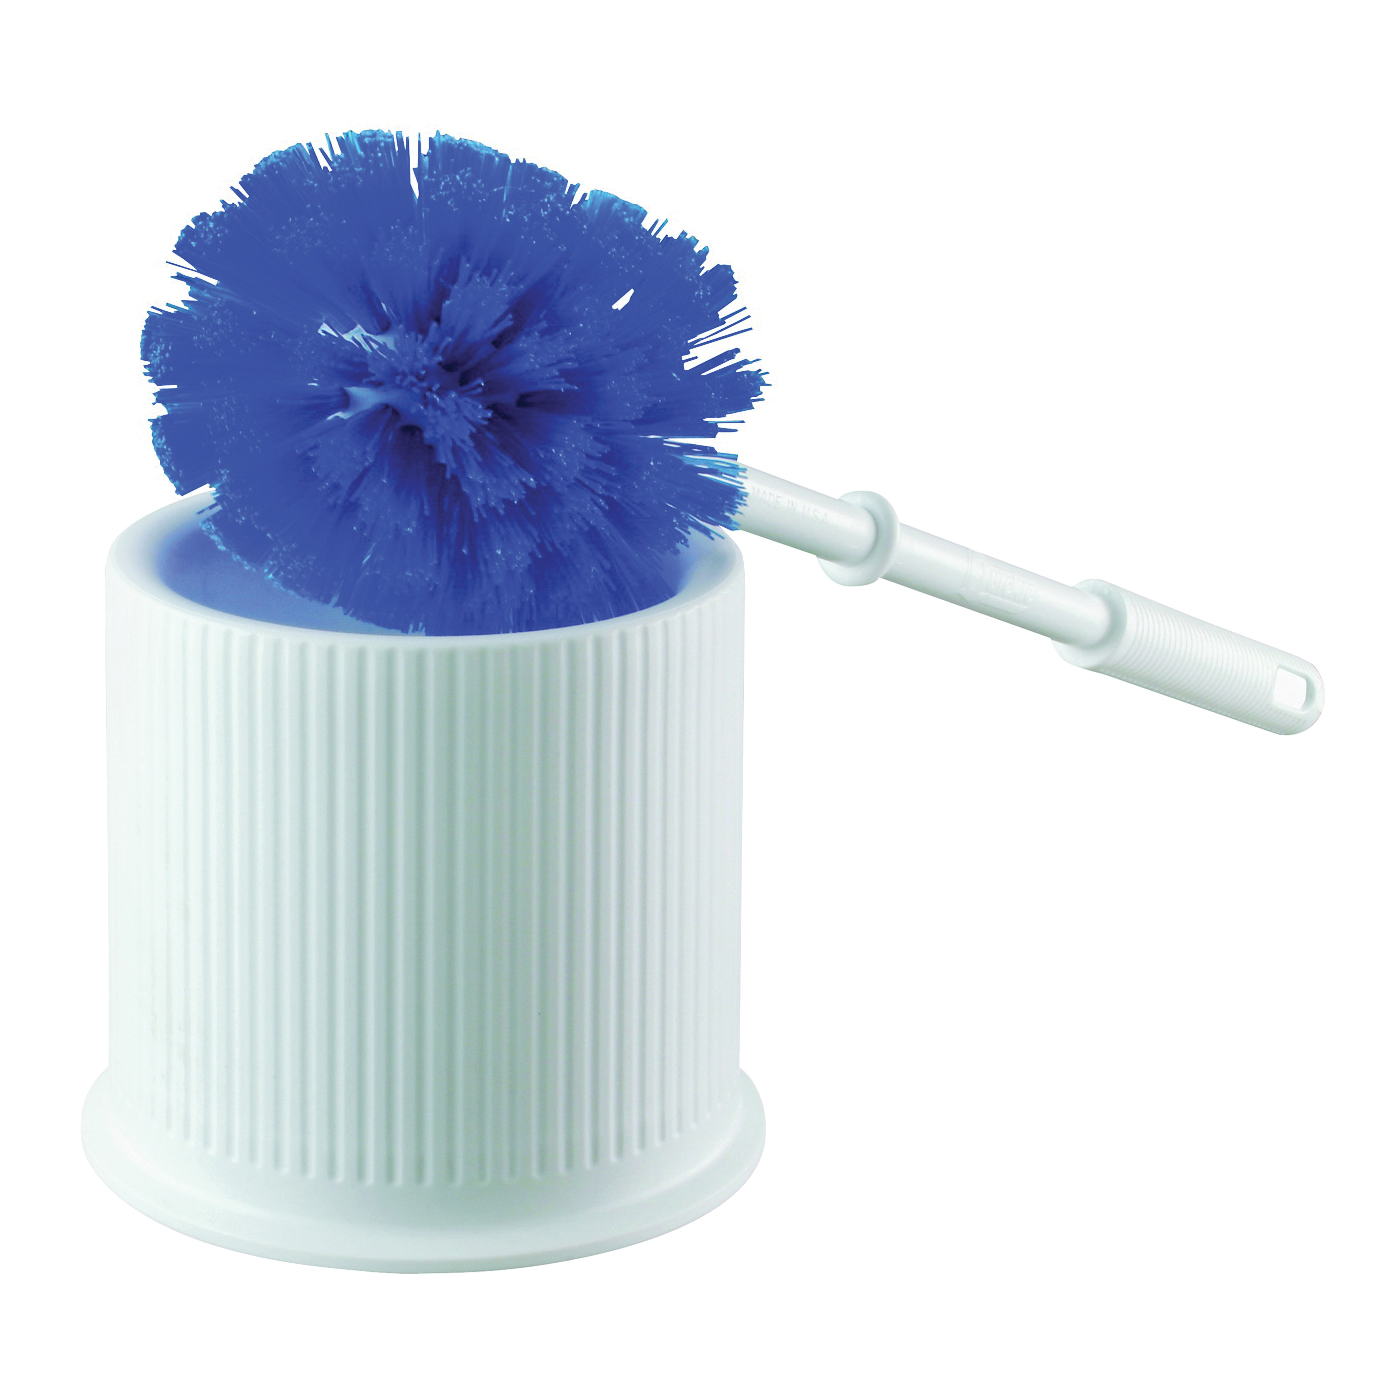 Quickie 305 Toilet Bowl Brush with Caddy, Round, Poly Fiber Bristle, Plastic Holder - 1